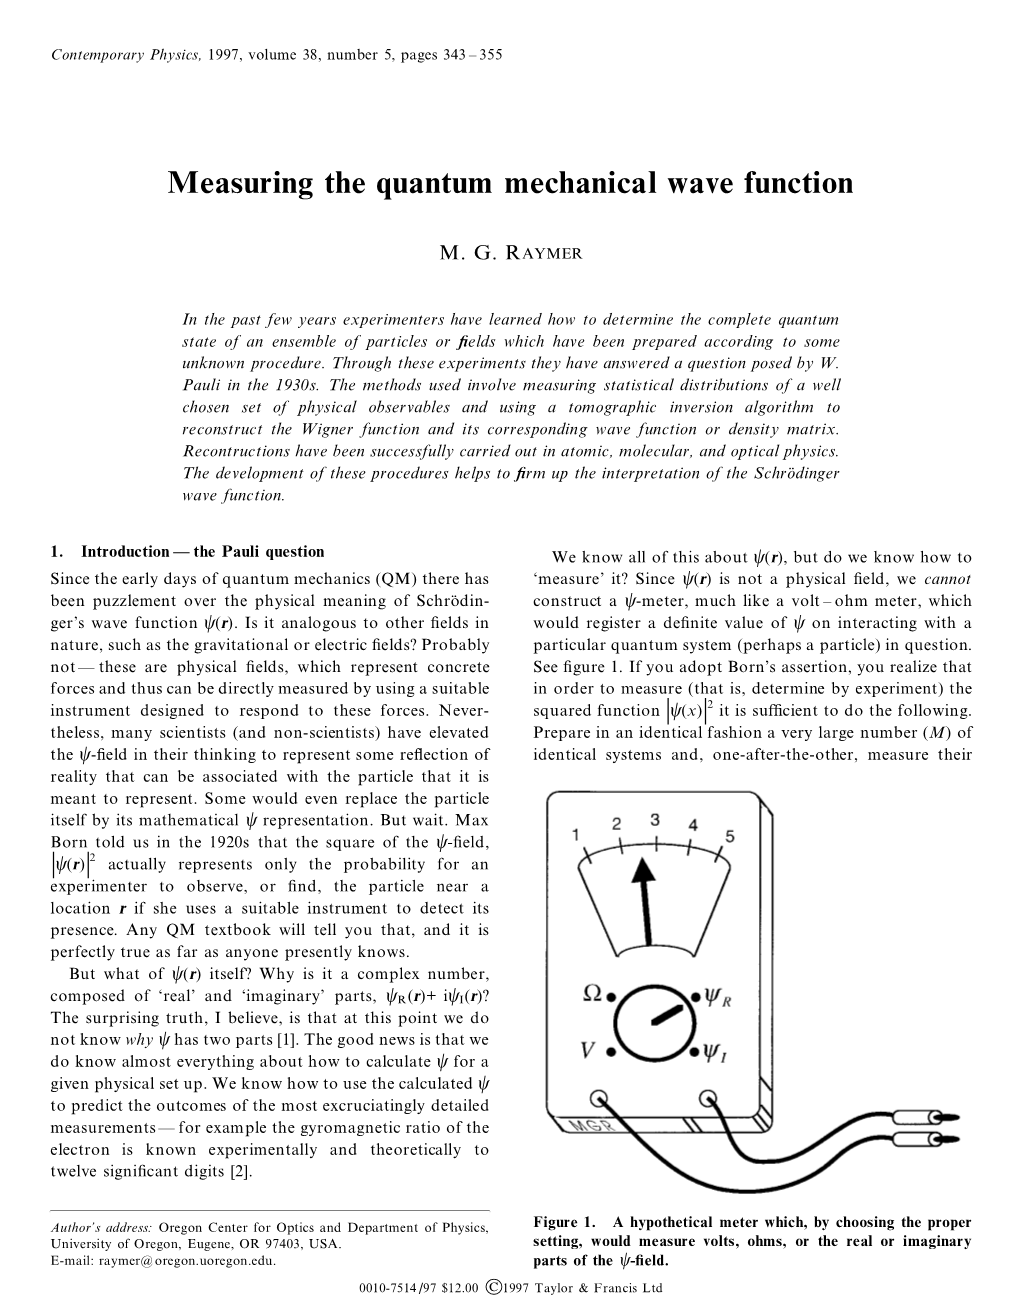 Measuring the Quantum Mechanical Wave Function